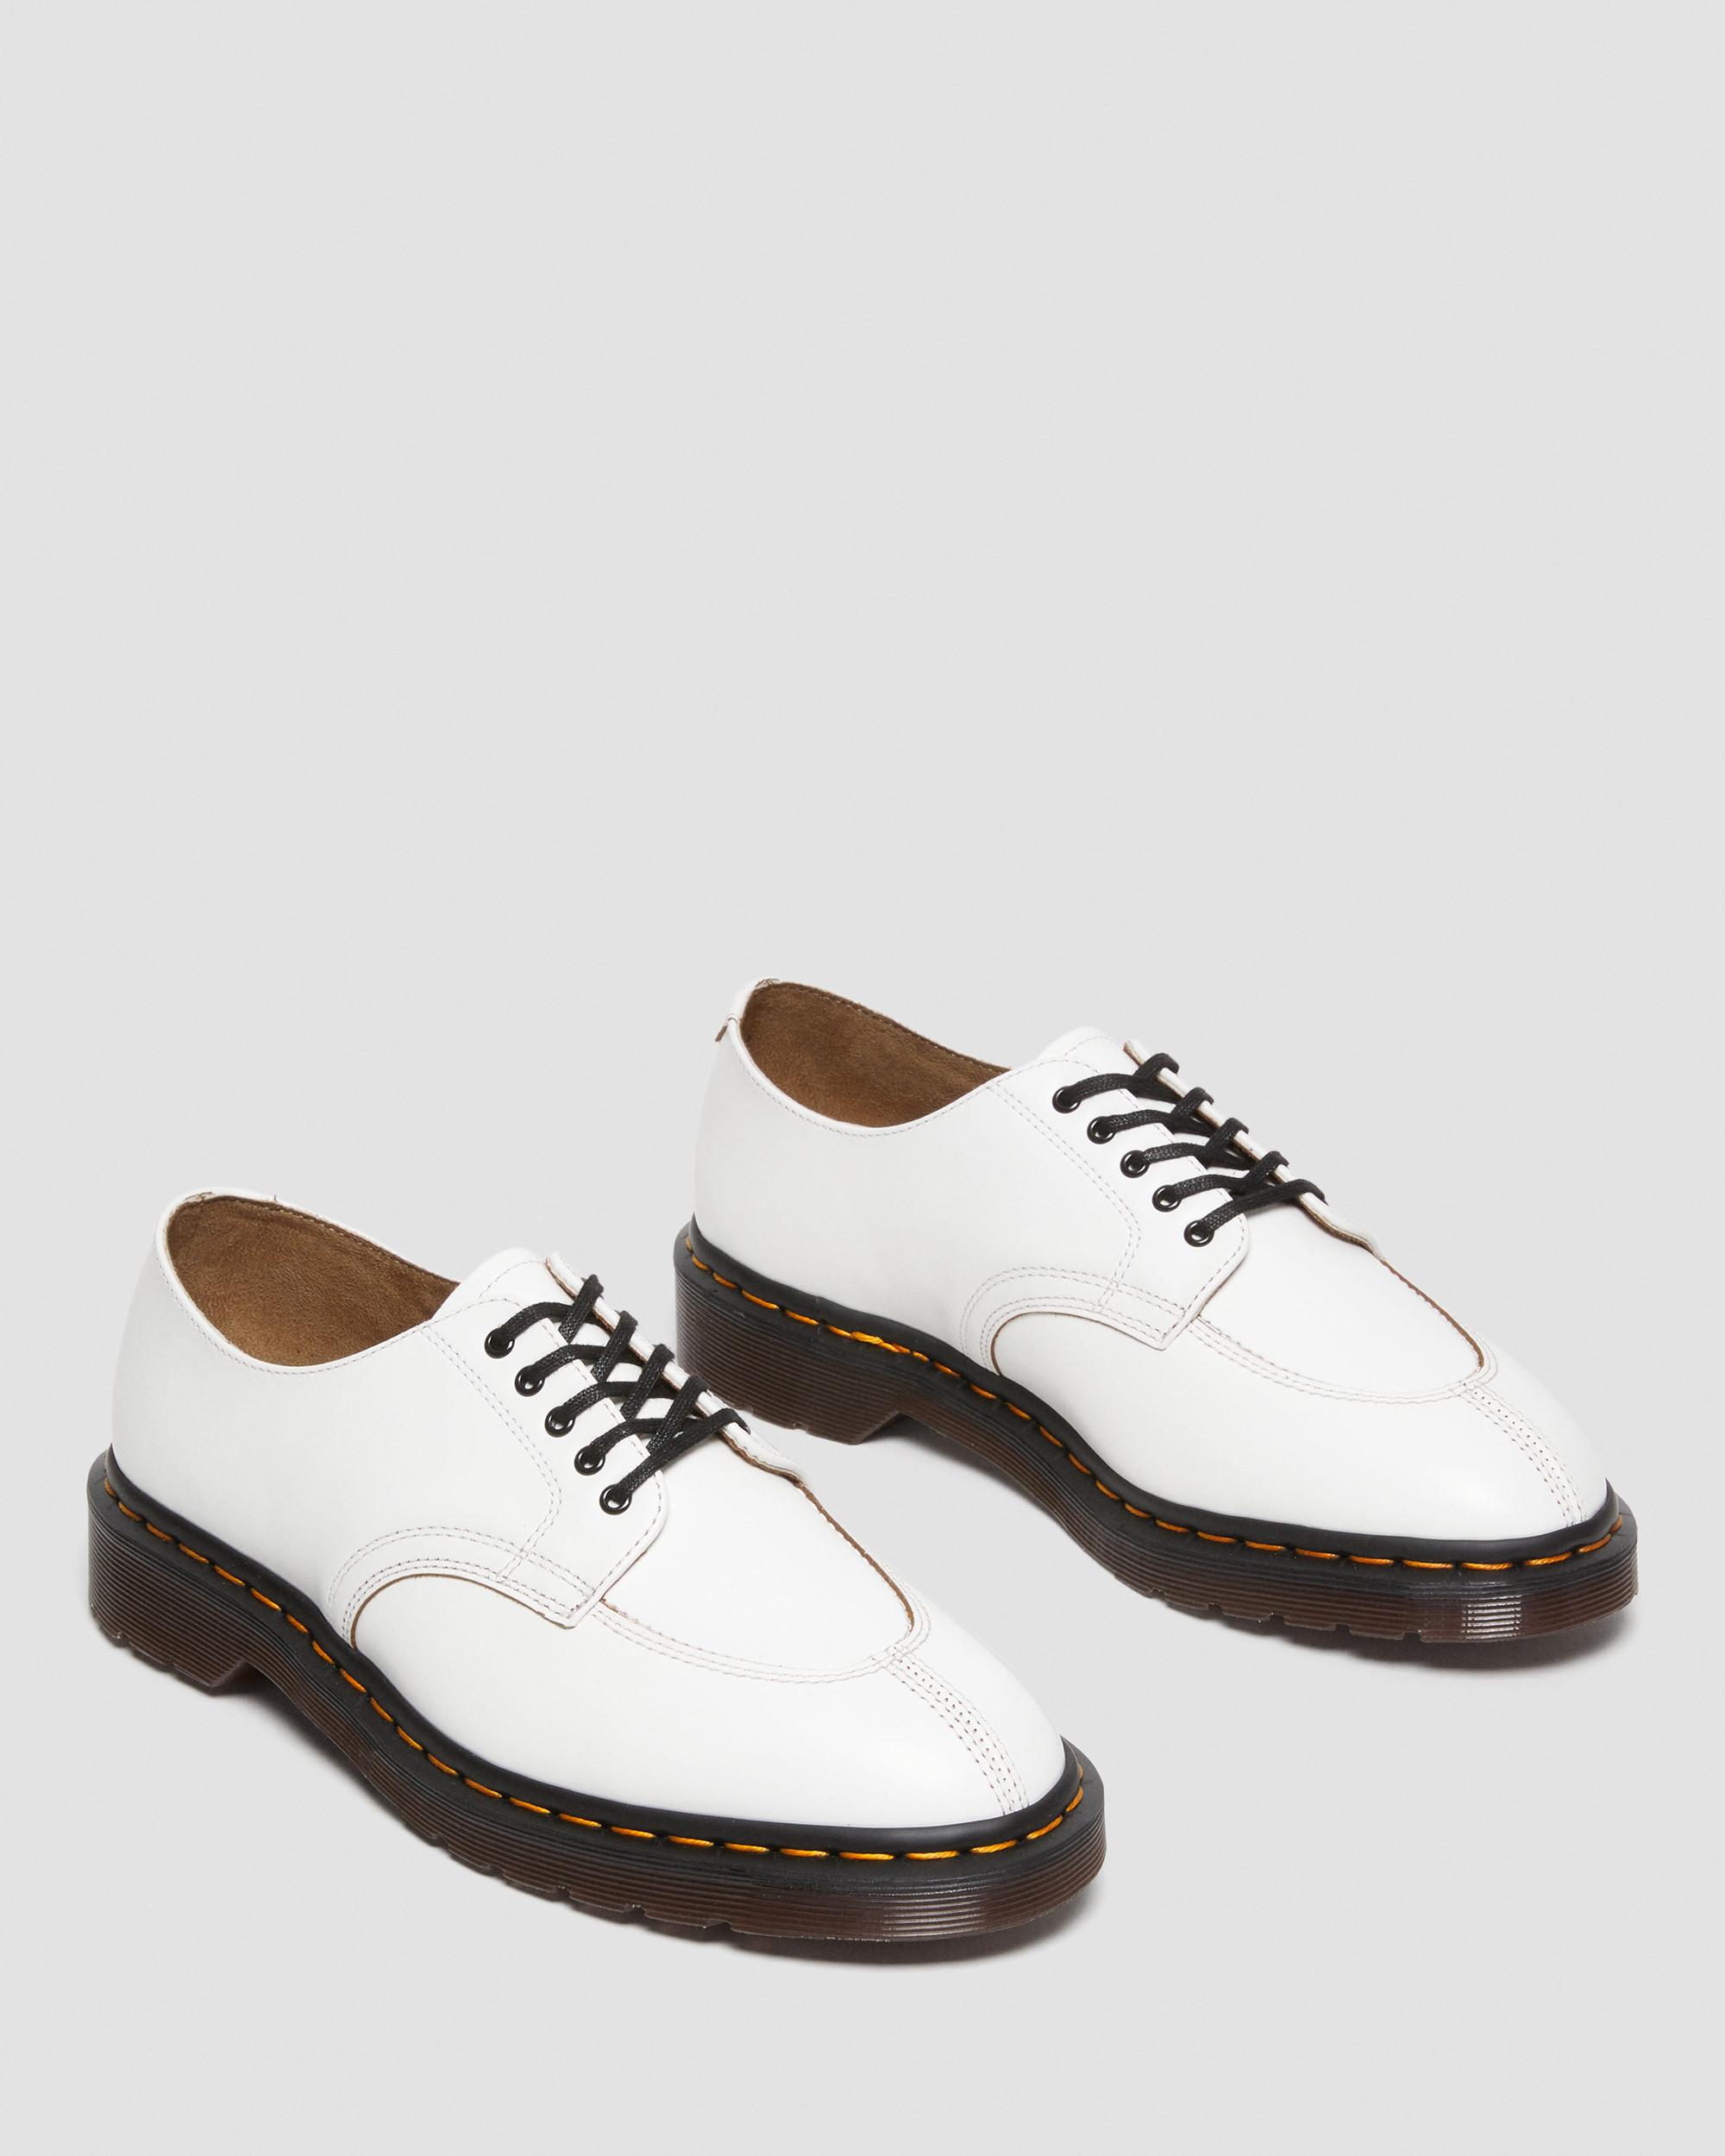 2046 Vintage Smooth Leather Oxford Shoes in White